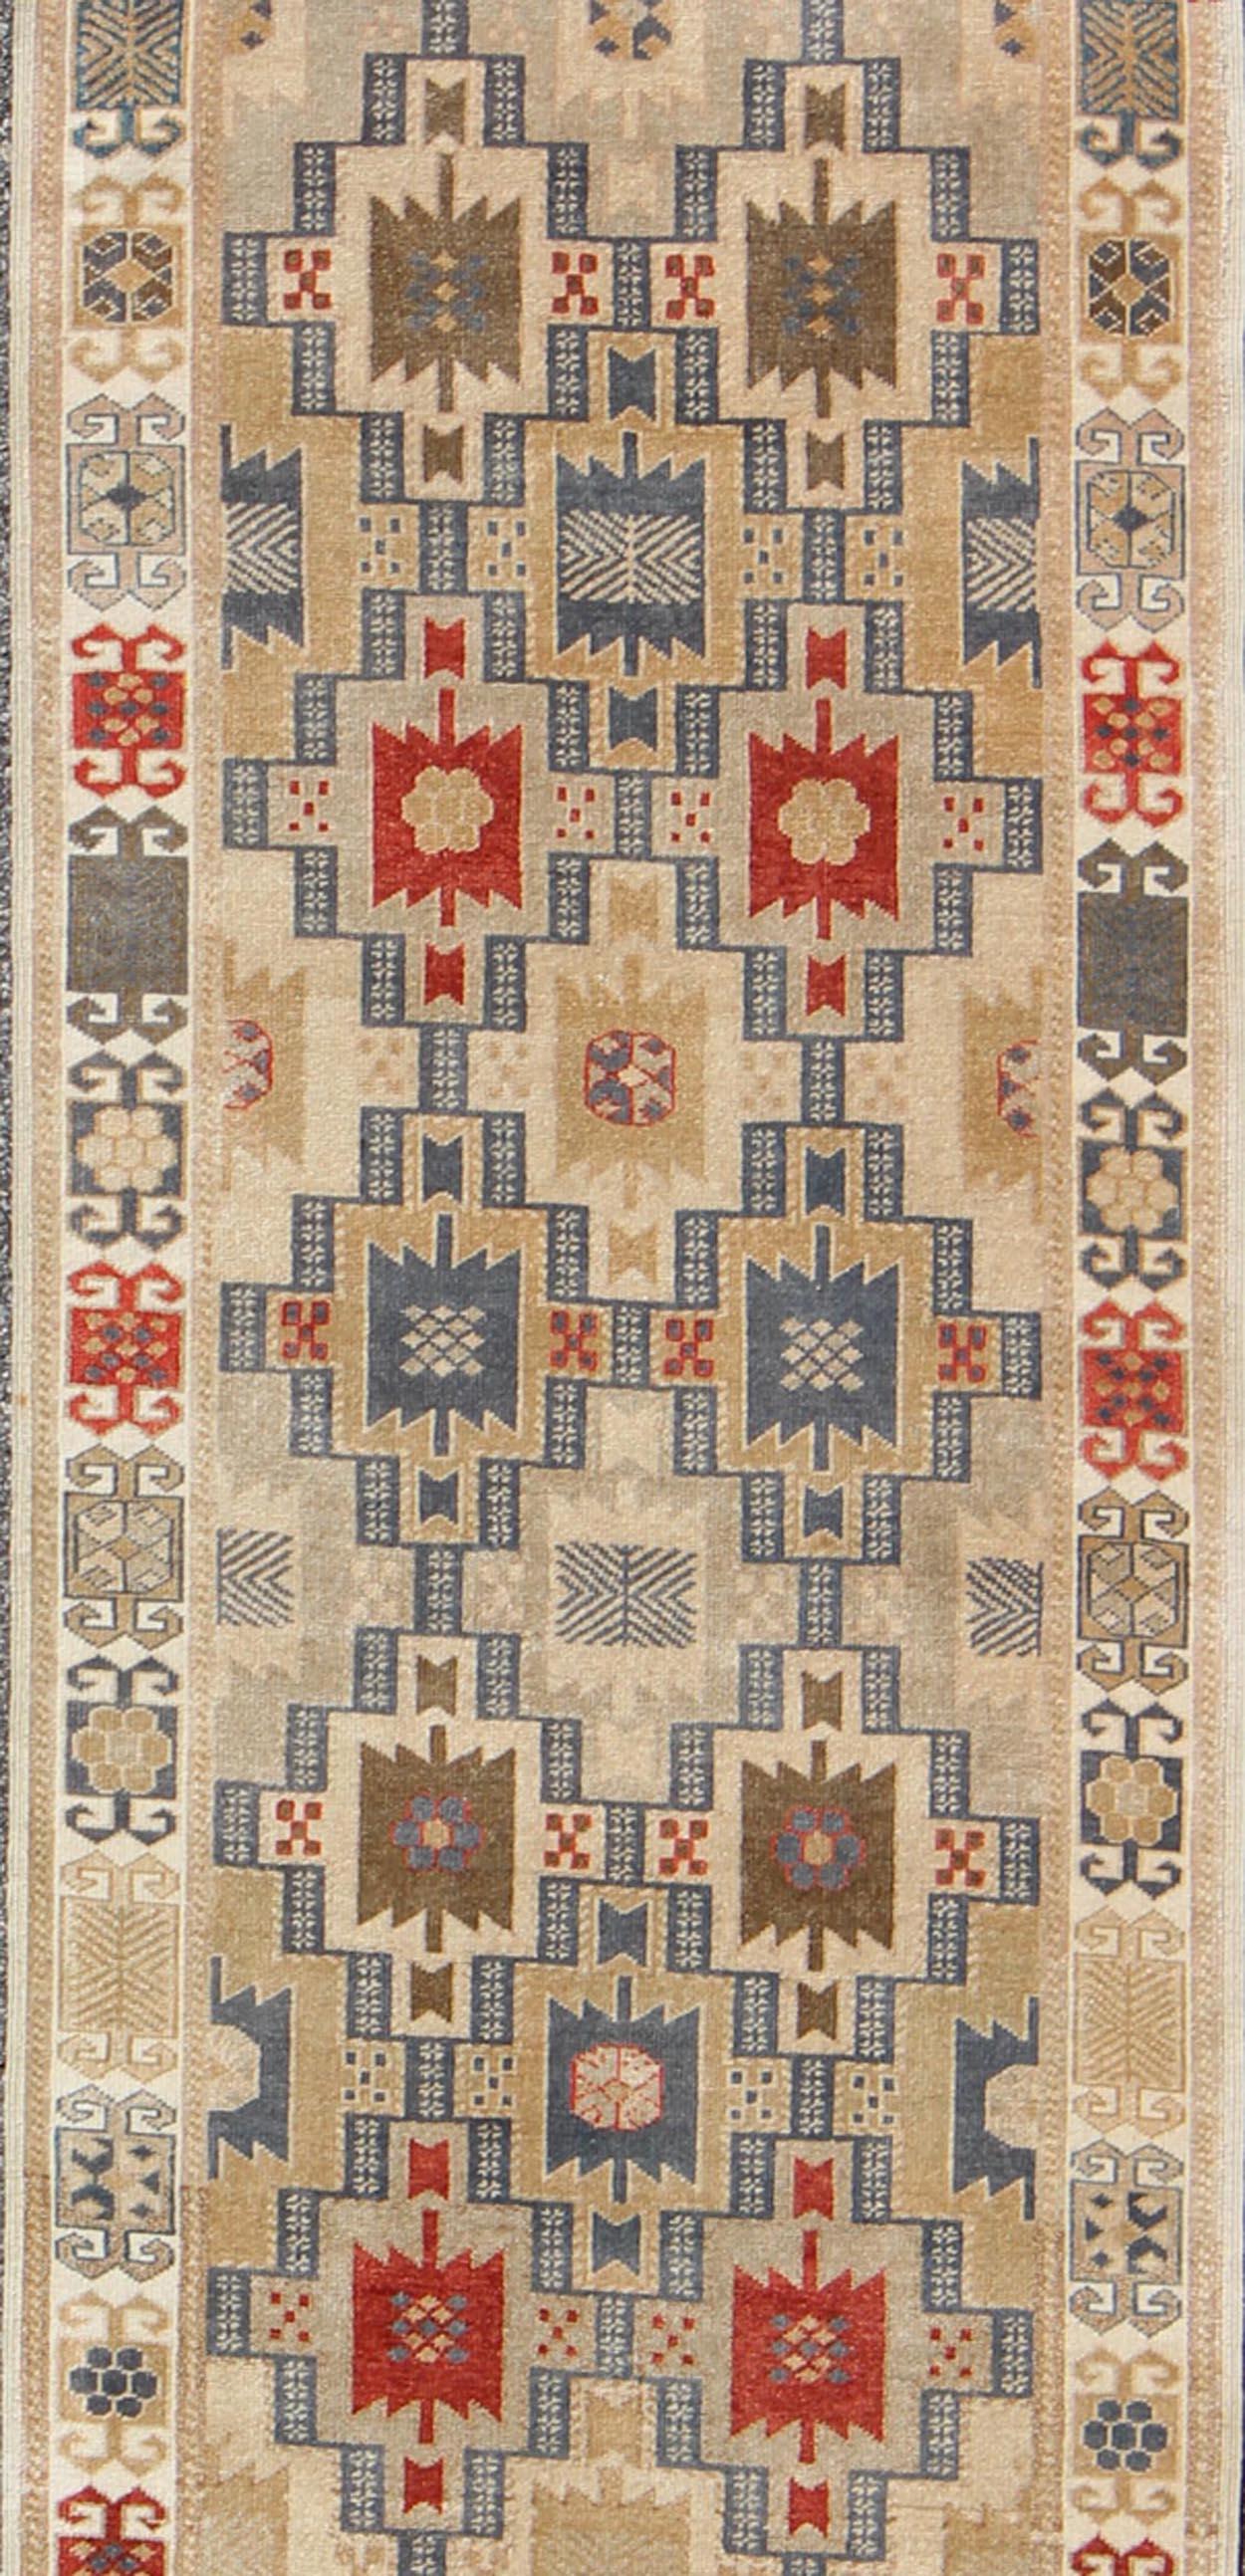 Exciting Multi-Colored Geometric Medallions in the field complemented by repeating geometric elements in the border. Antique Oushak Runner, rug tu-vey-4811, country of origin / type: Turkey / Oushak, circa 1930

Set on light camel and butter color